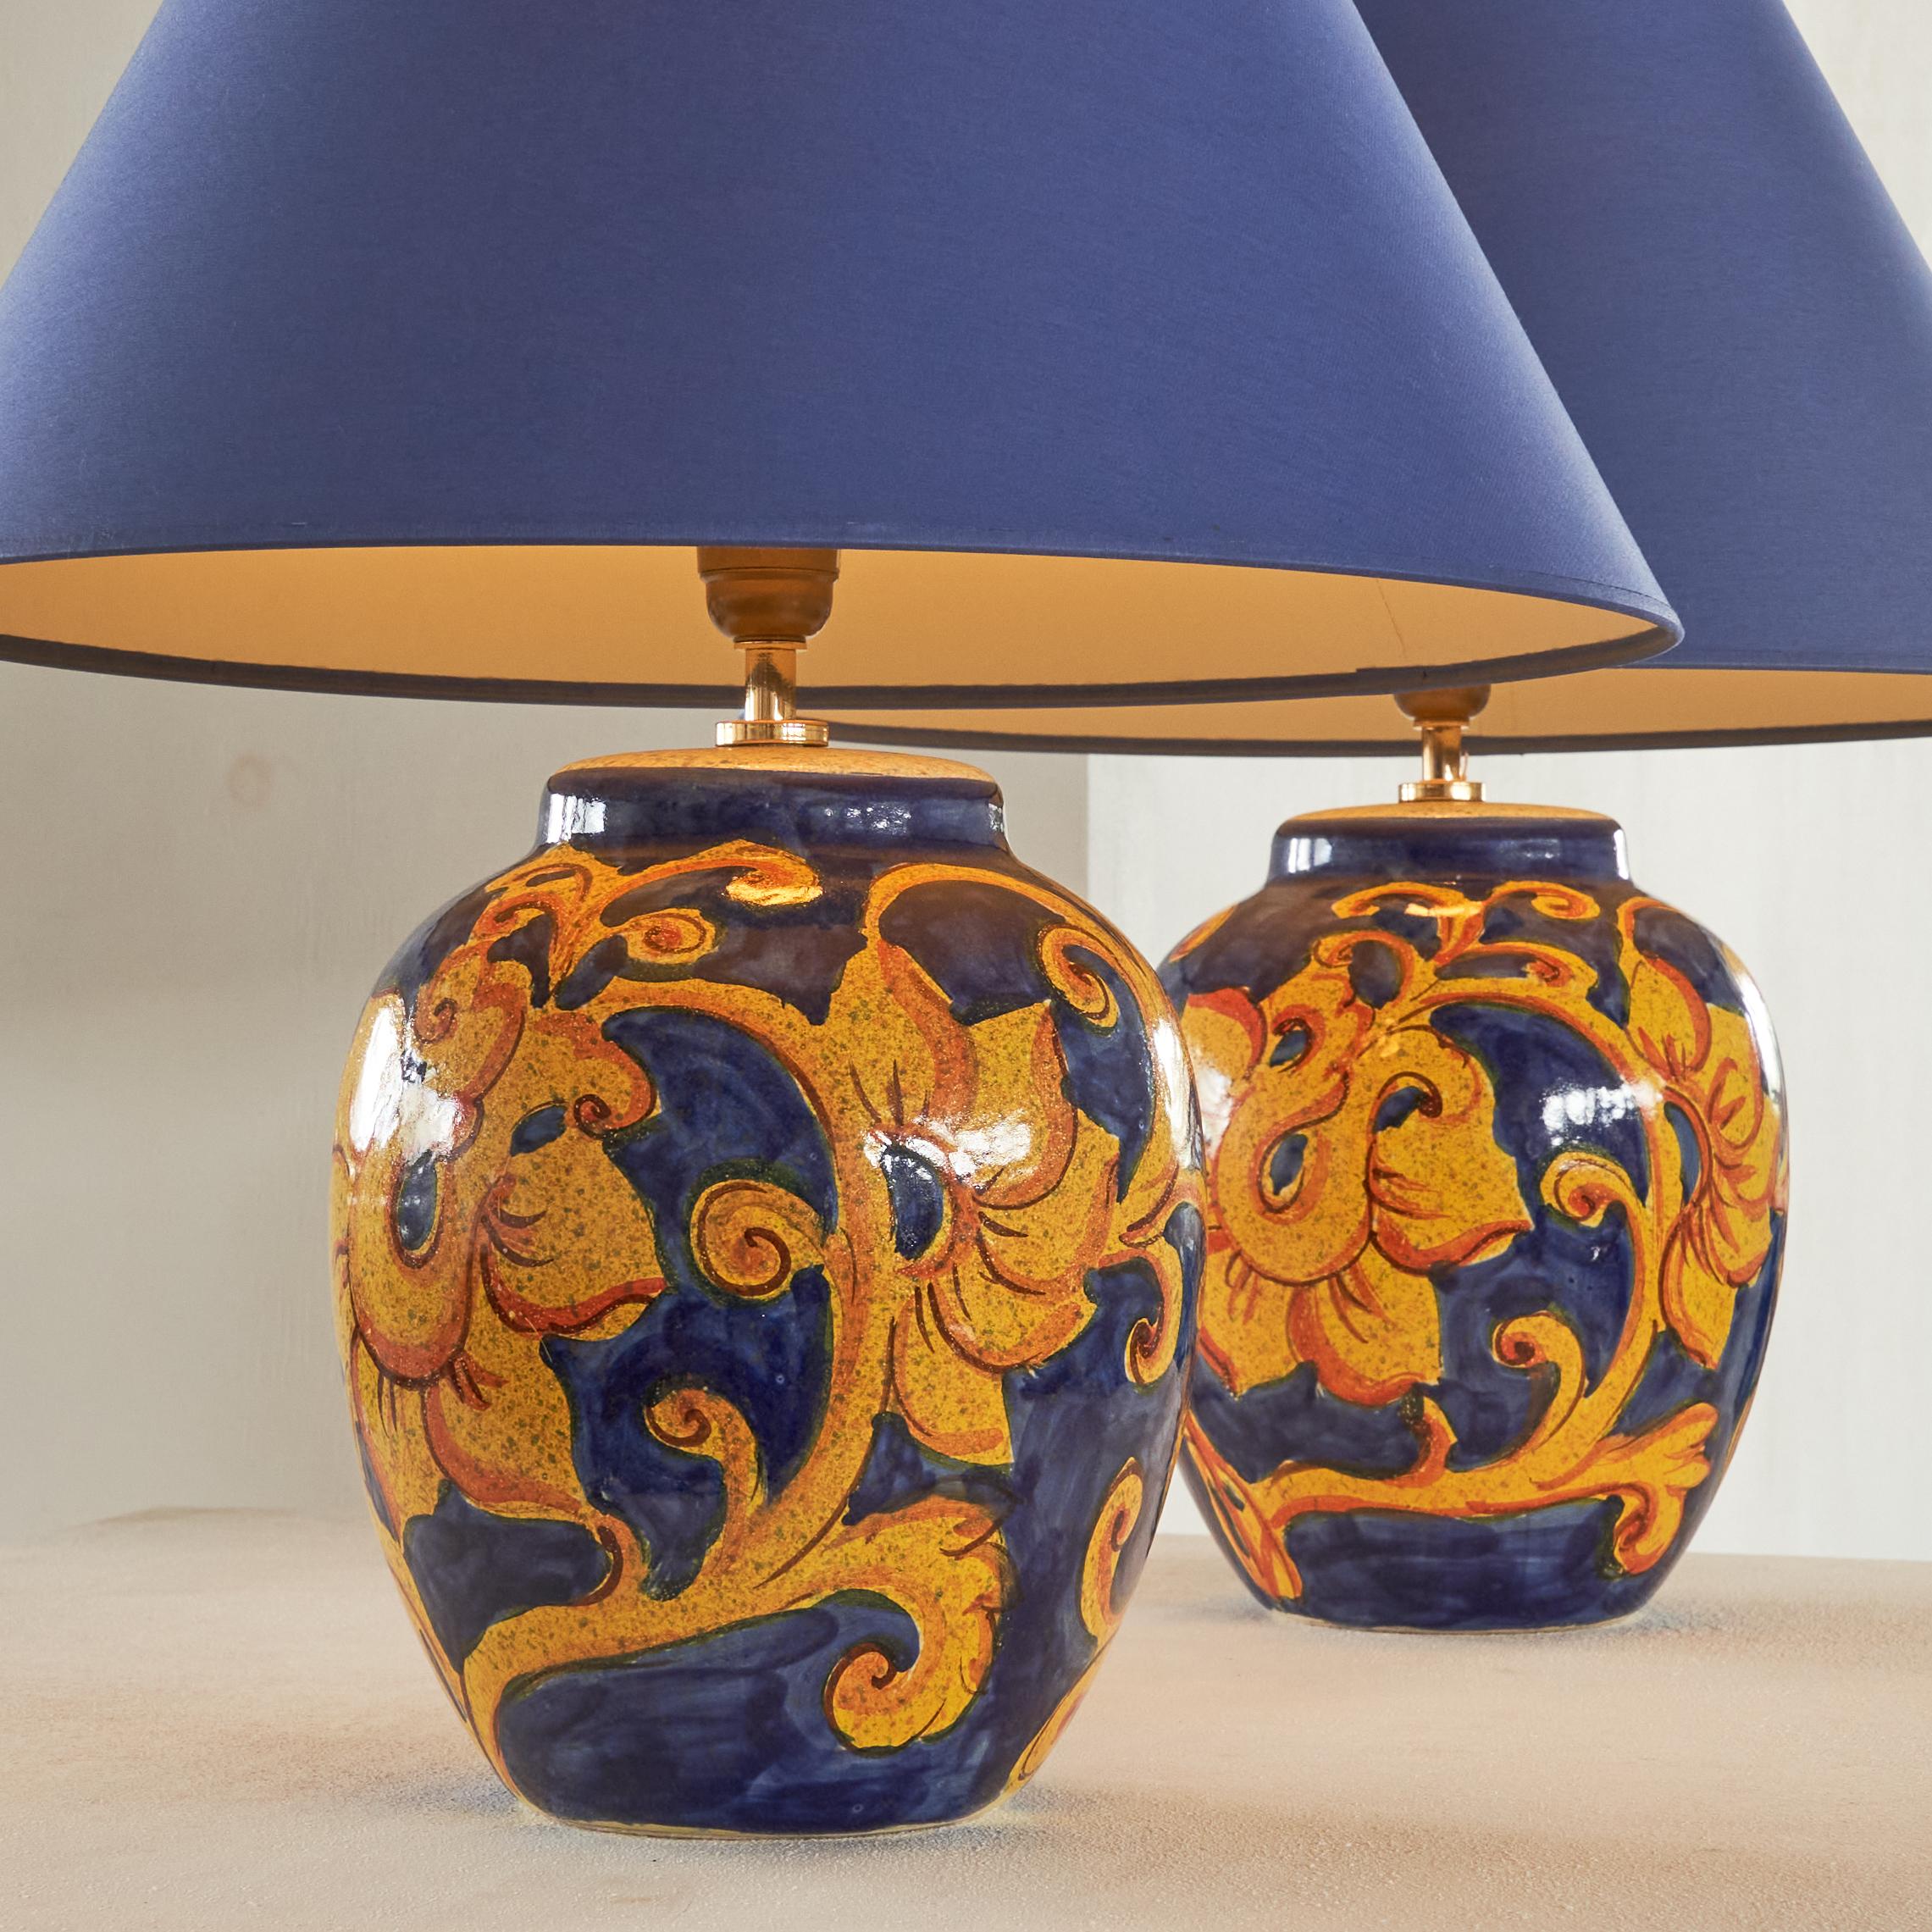 Mid-Century Modern Pair of French Hand Painted Ceramic Table Lamps with Floral Decor 1980s For Sale